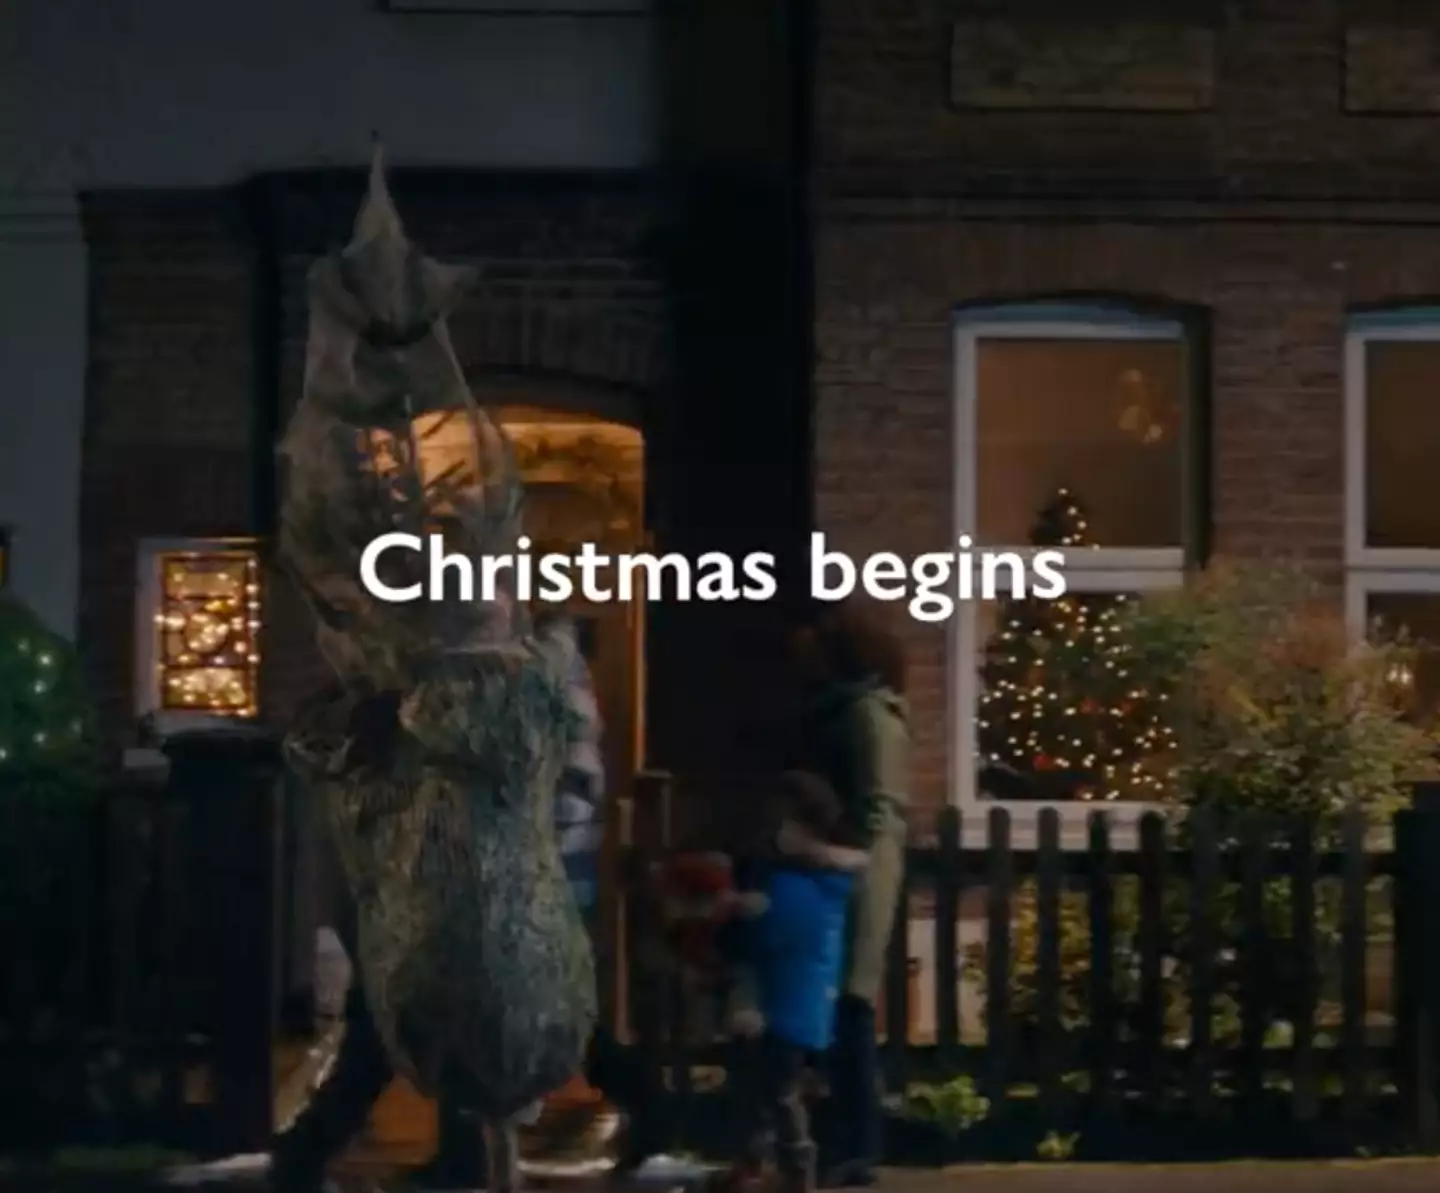 John Lewis teased a clip yesterday.